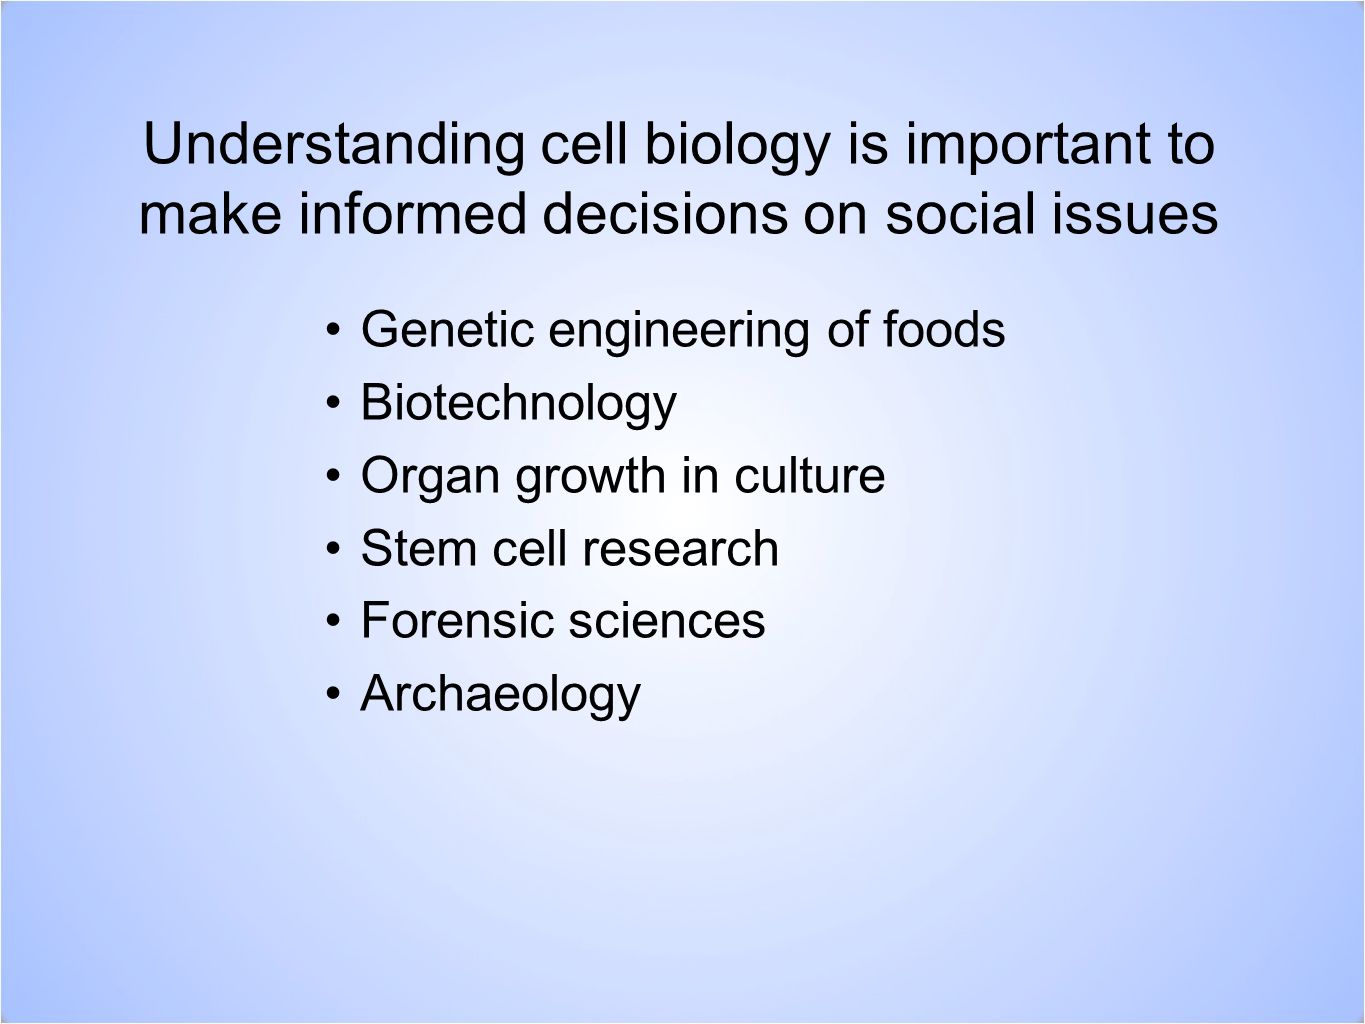 Understanding cell biology is important to make informed decisions on social issues Genetic engineering of foods Biotechnology Organ growth in culture Stem cell research Forensic sciences Archaeology